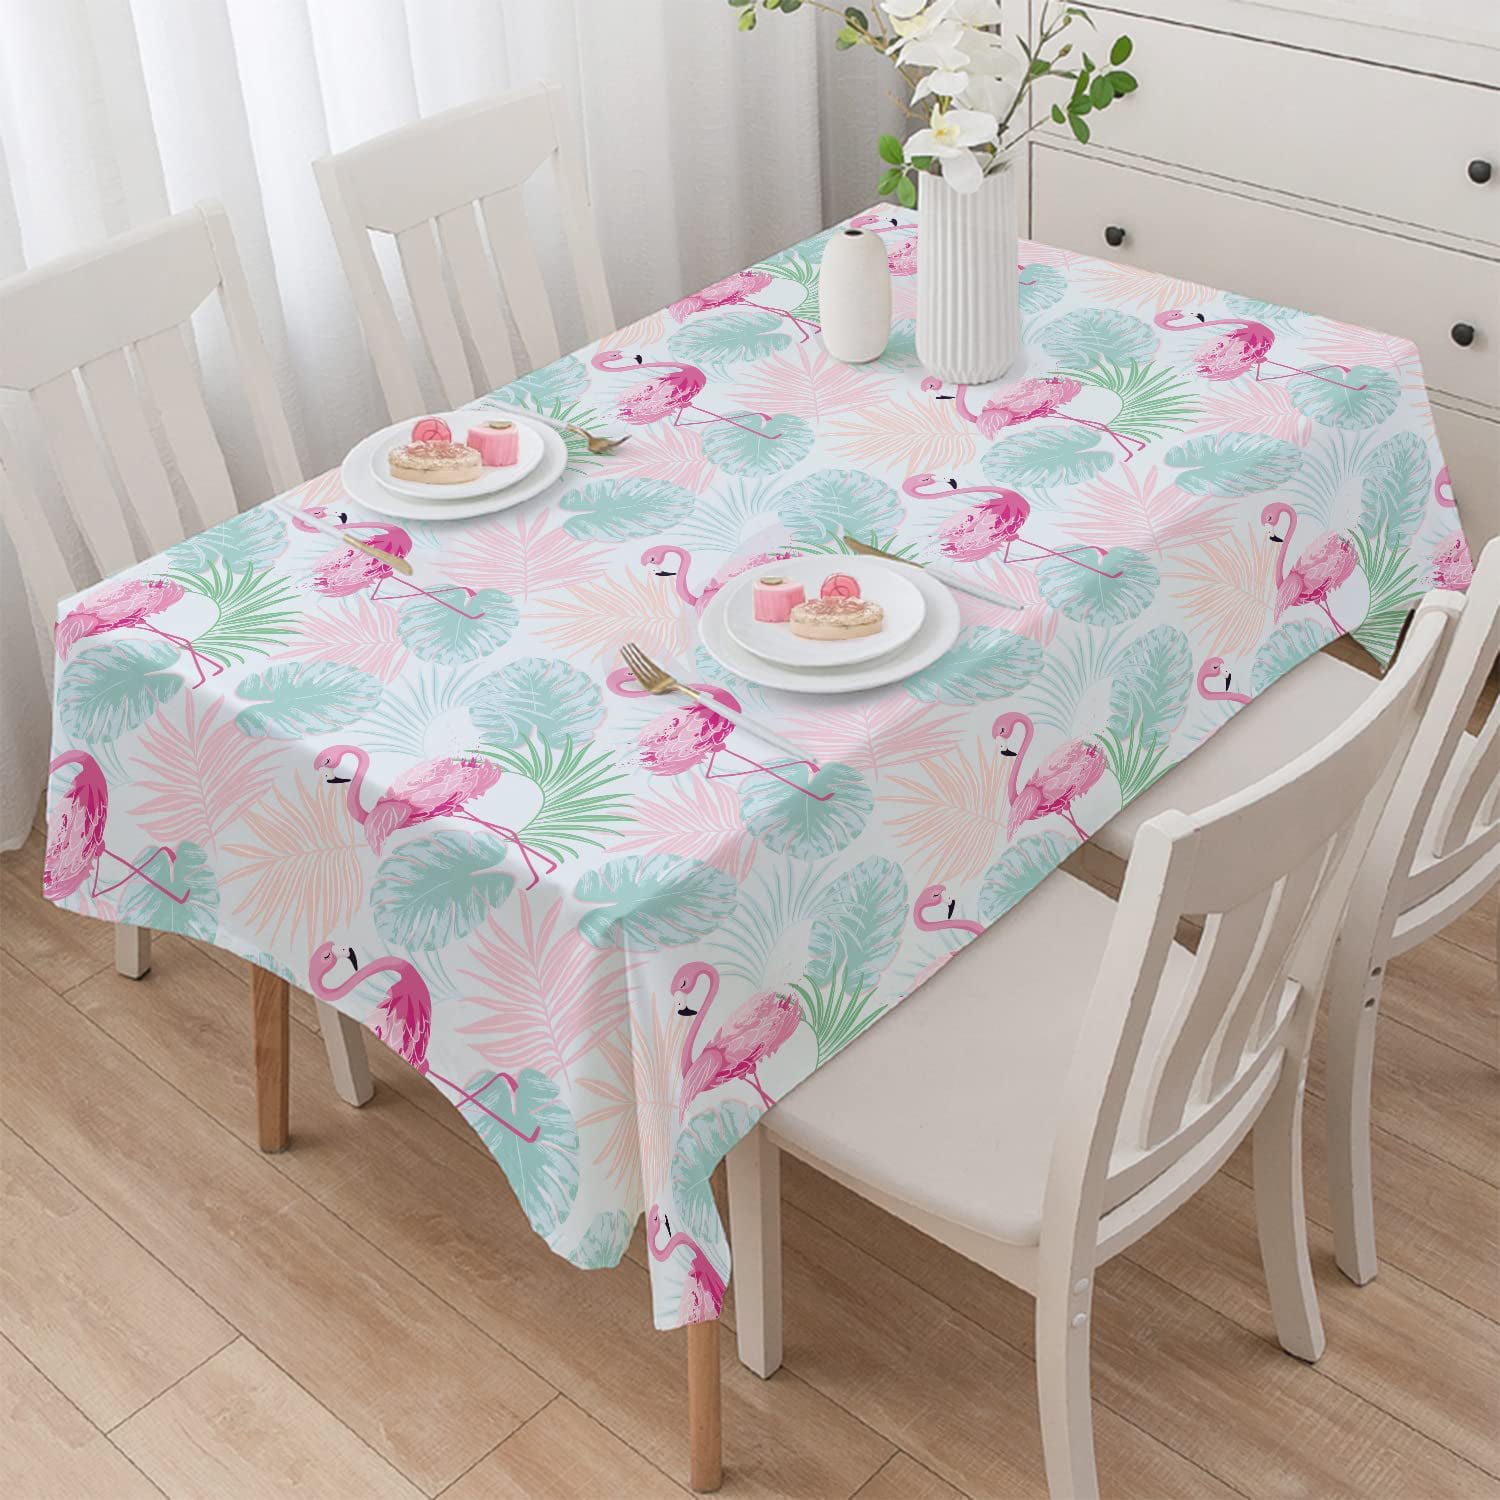 humcustom Plum Flower Oval Print Tablecloth, Spring Patterned Oval  Tablecloth, Summer Food Network Oval Tablecloth Waterproof Wrinkle Free  Durable Tablecloth for Oval Tables 60 X 84 Inch 